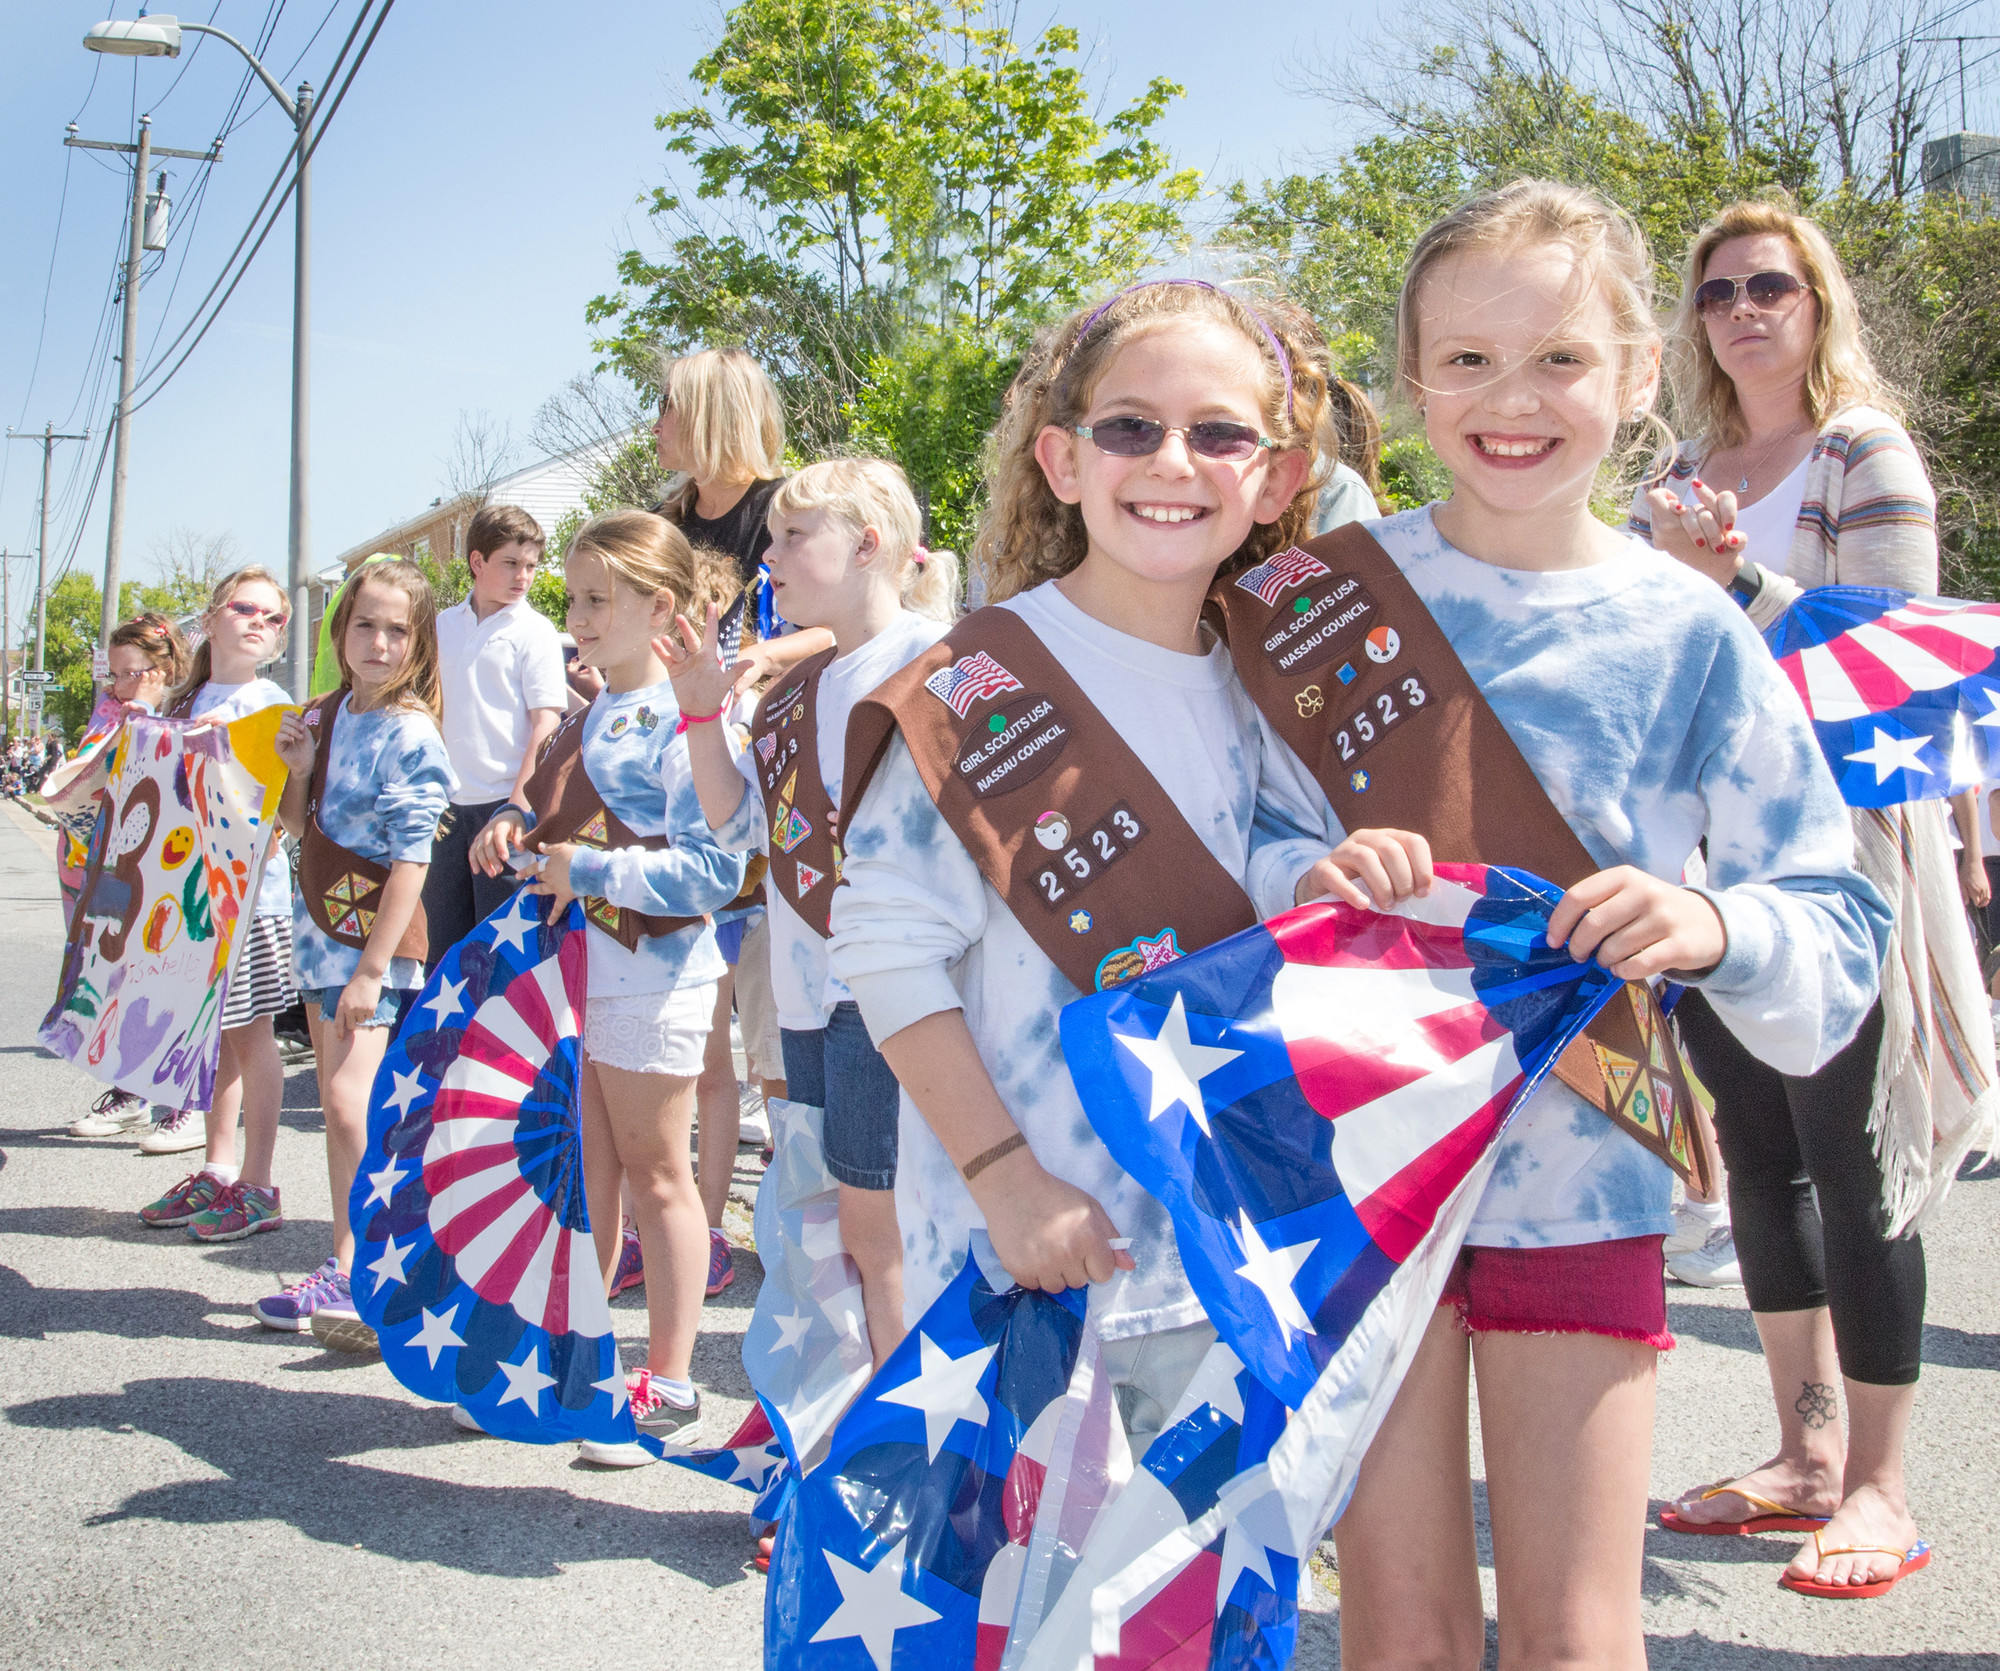 Maggie Keating, left, 8, and Anna Pagan, 8, from Brownies Troop 2523 cheered as the Veterans passed by.